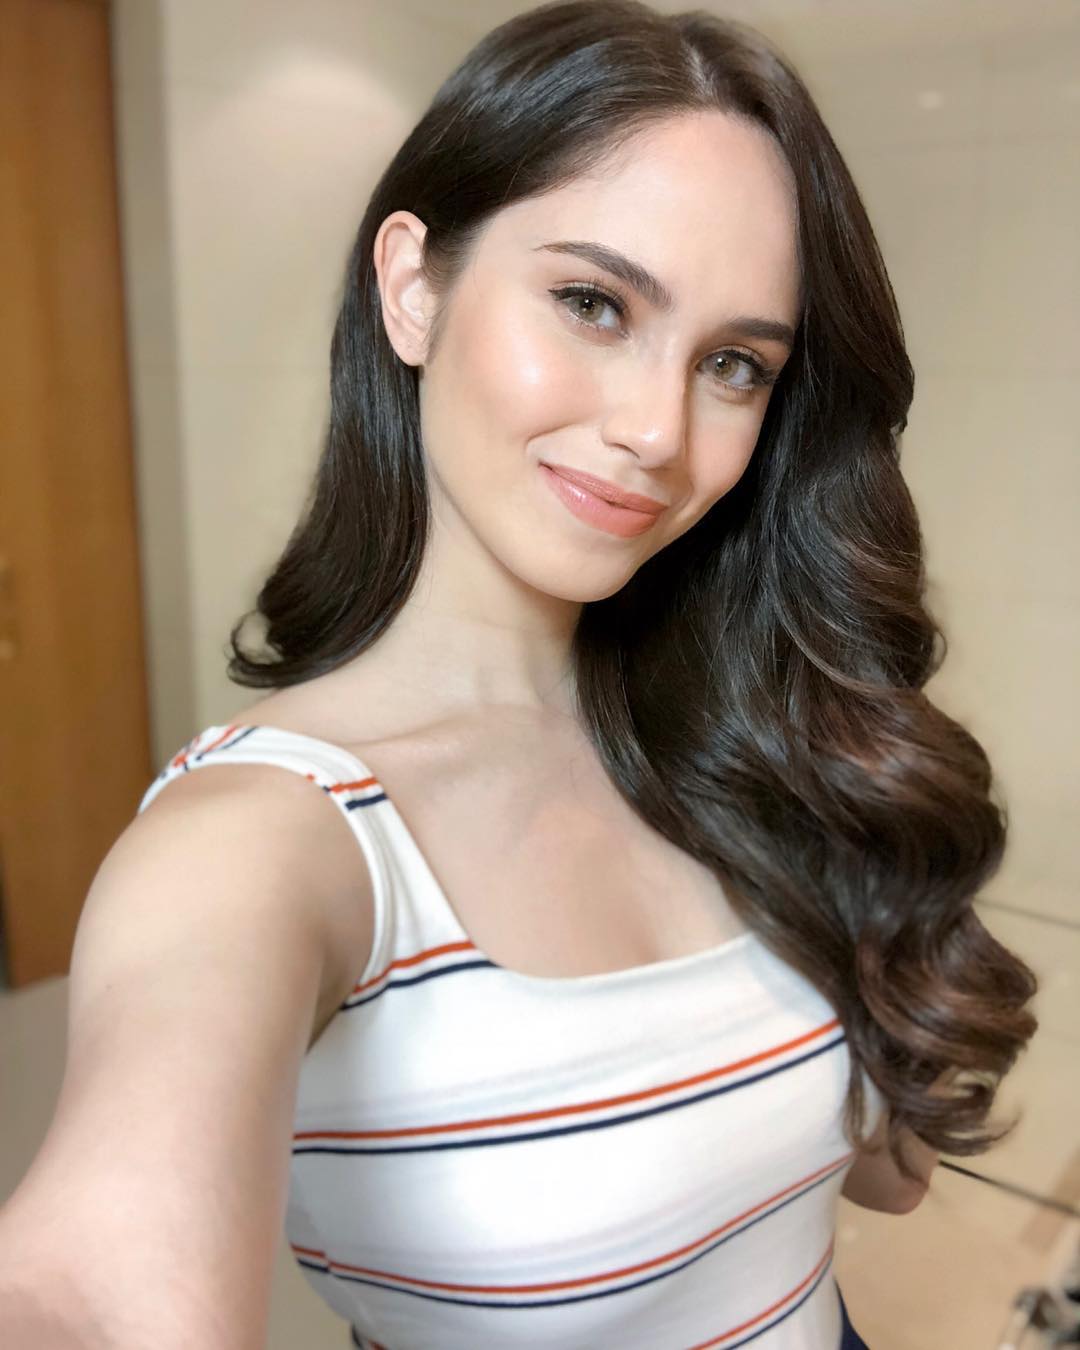 COMELEC spokesperson quits source code body after sexy Jessy Mendiola pic p...